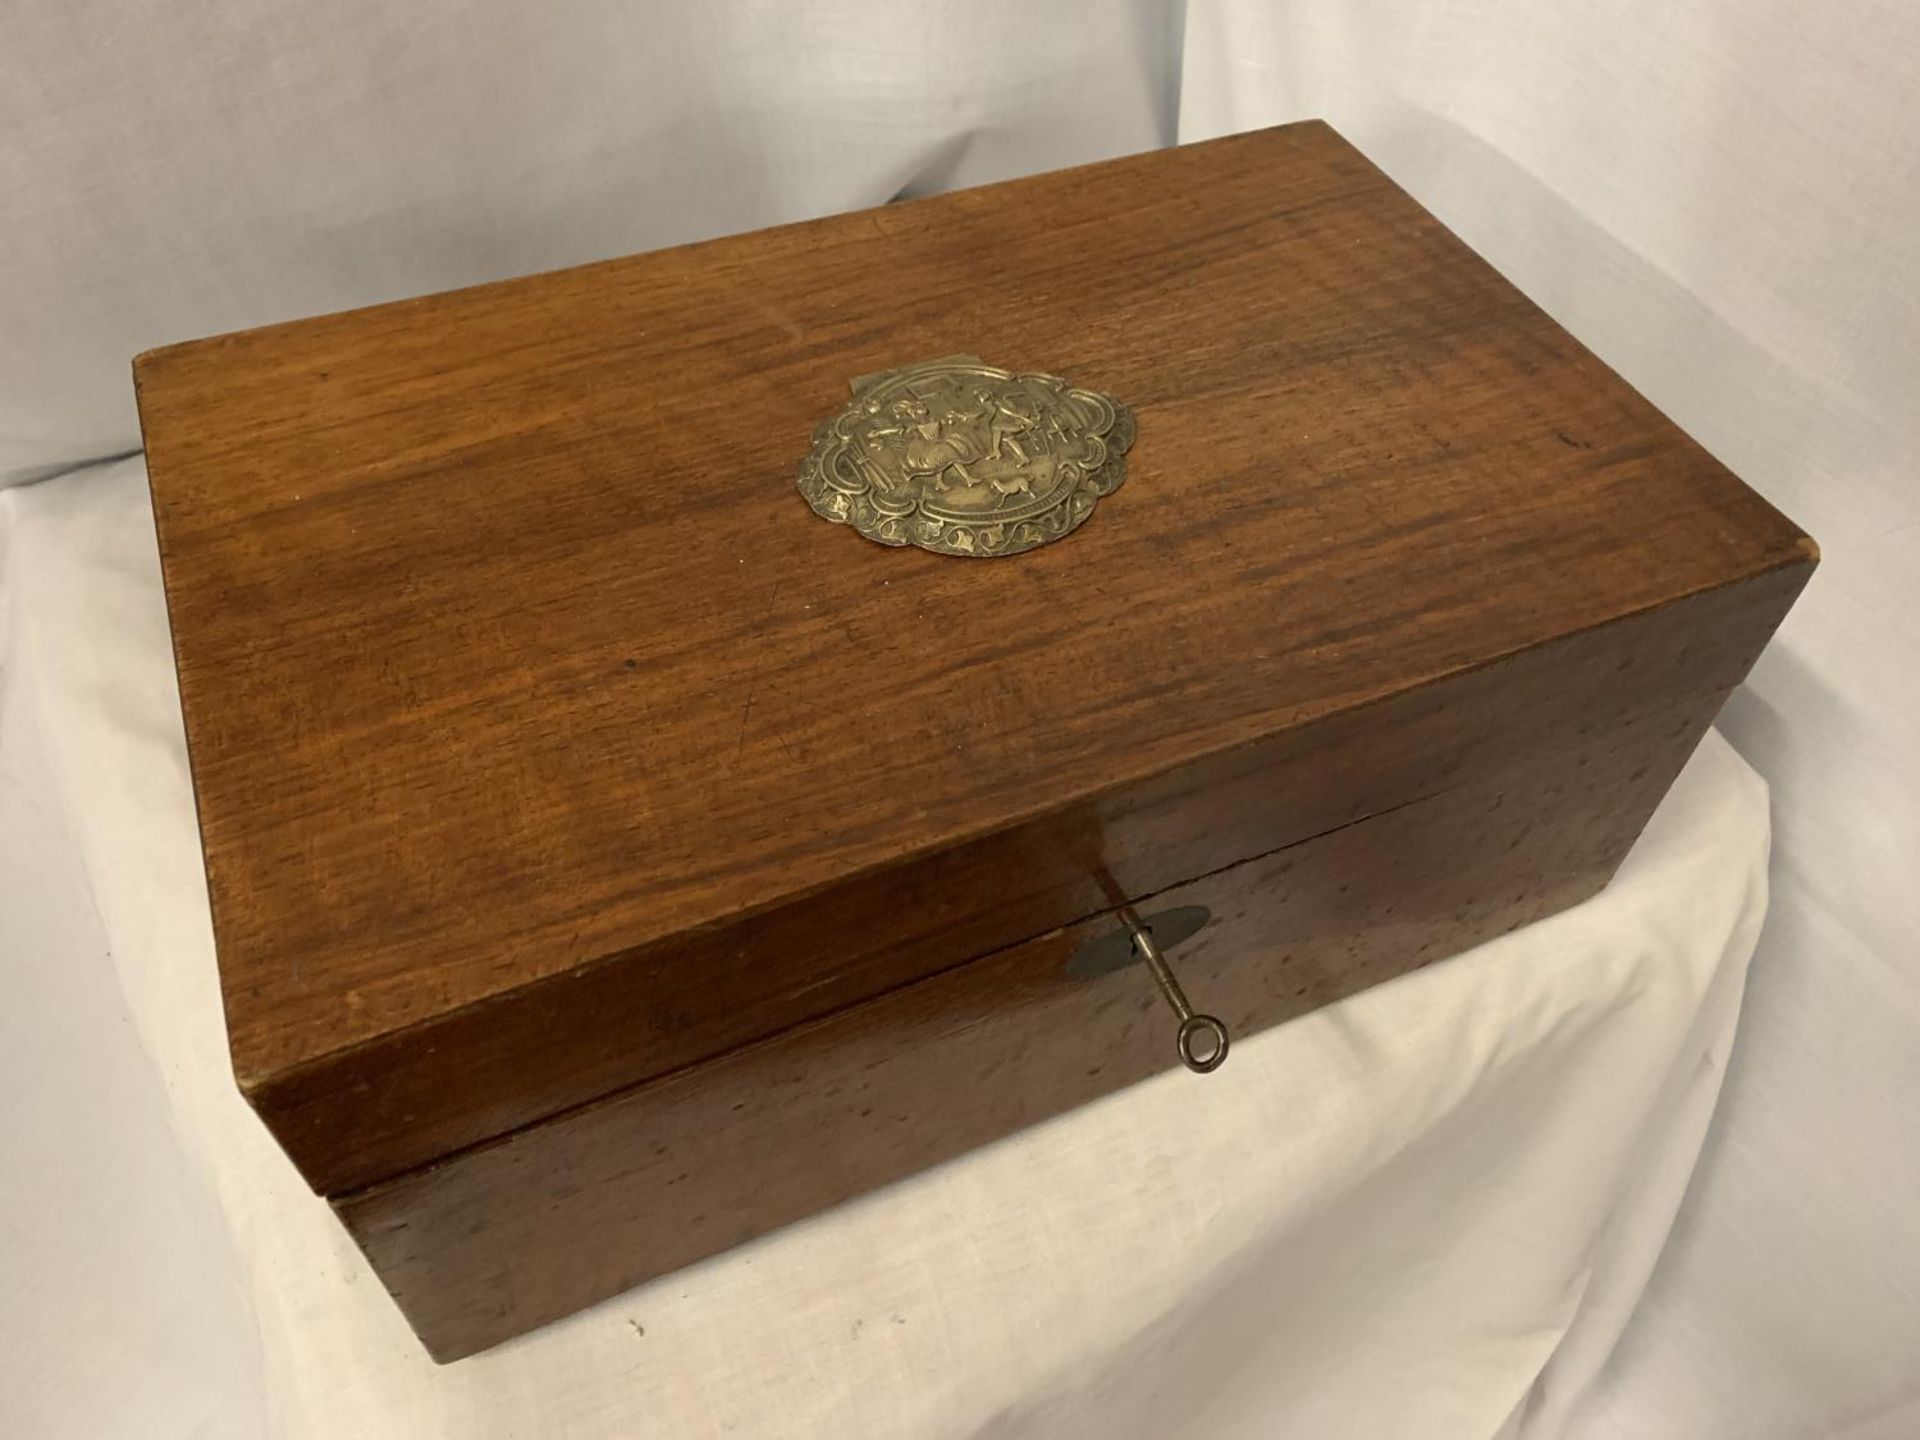 A MAHOGANY WRITING SLOPE WITH A DECORATIVE PLAQUE AND KEY TO INCLUDE A PARKER BIRO